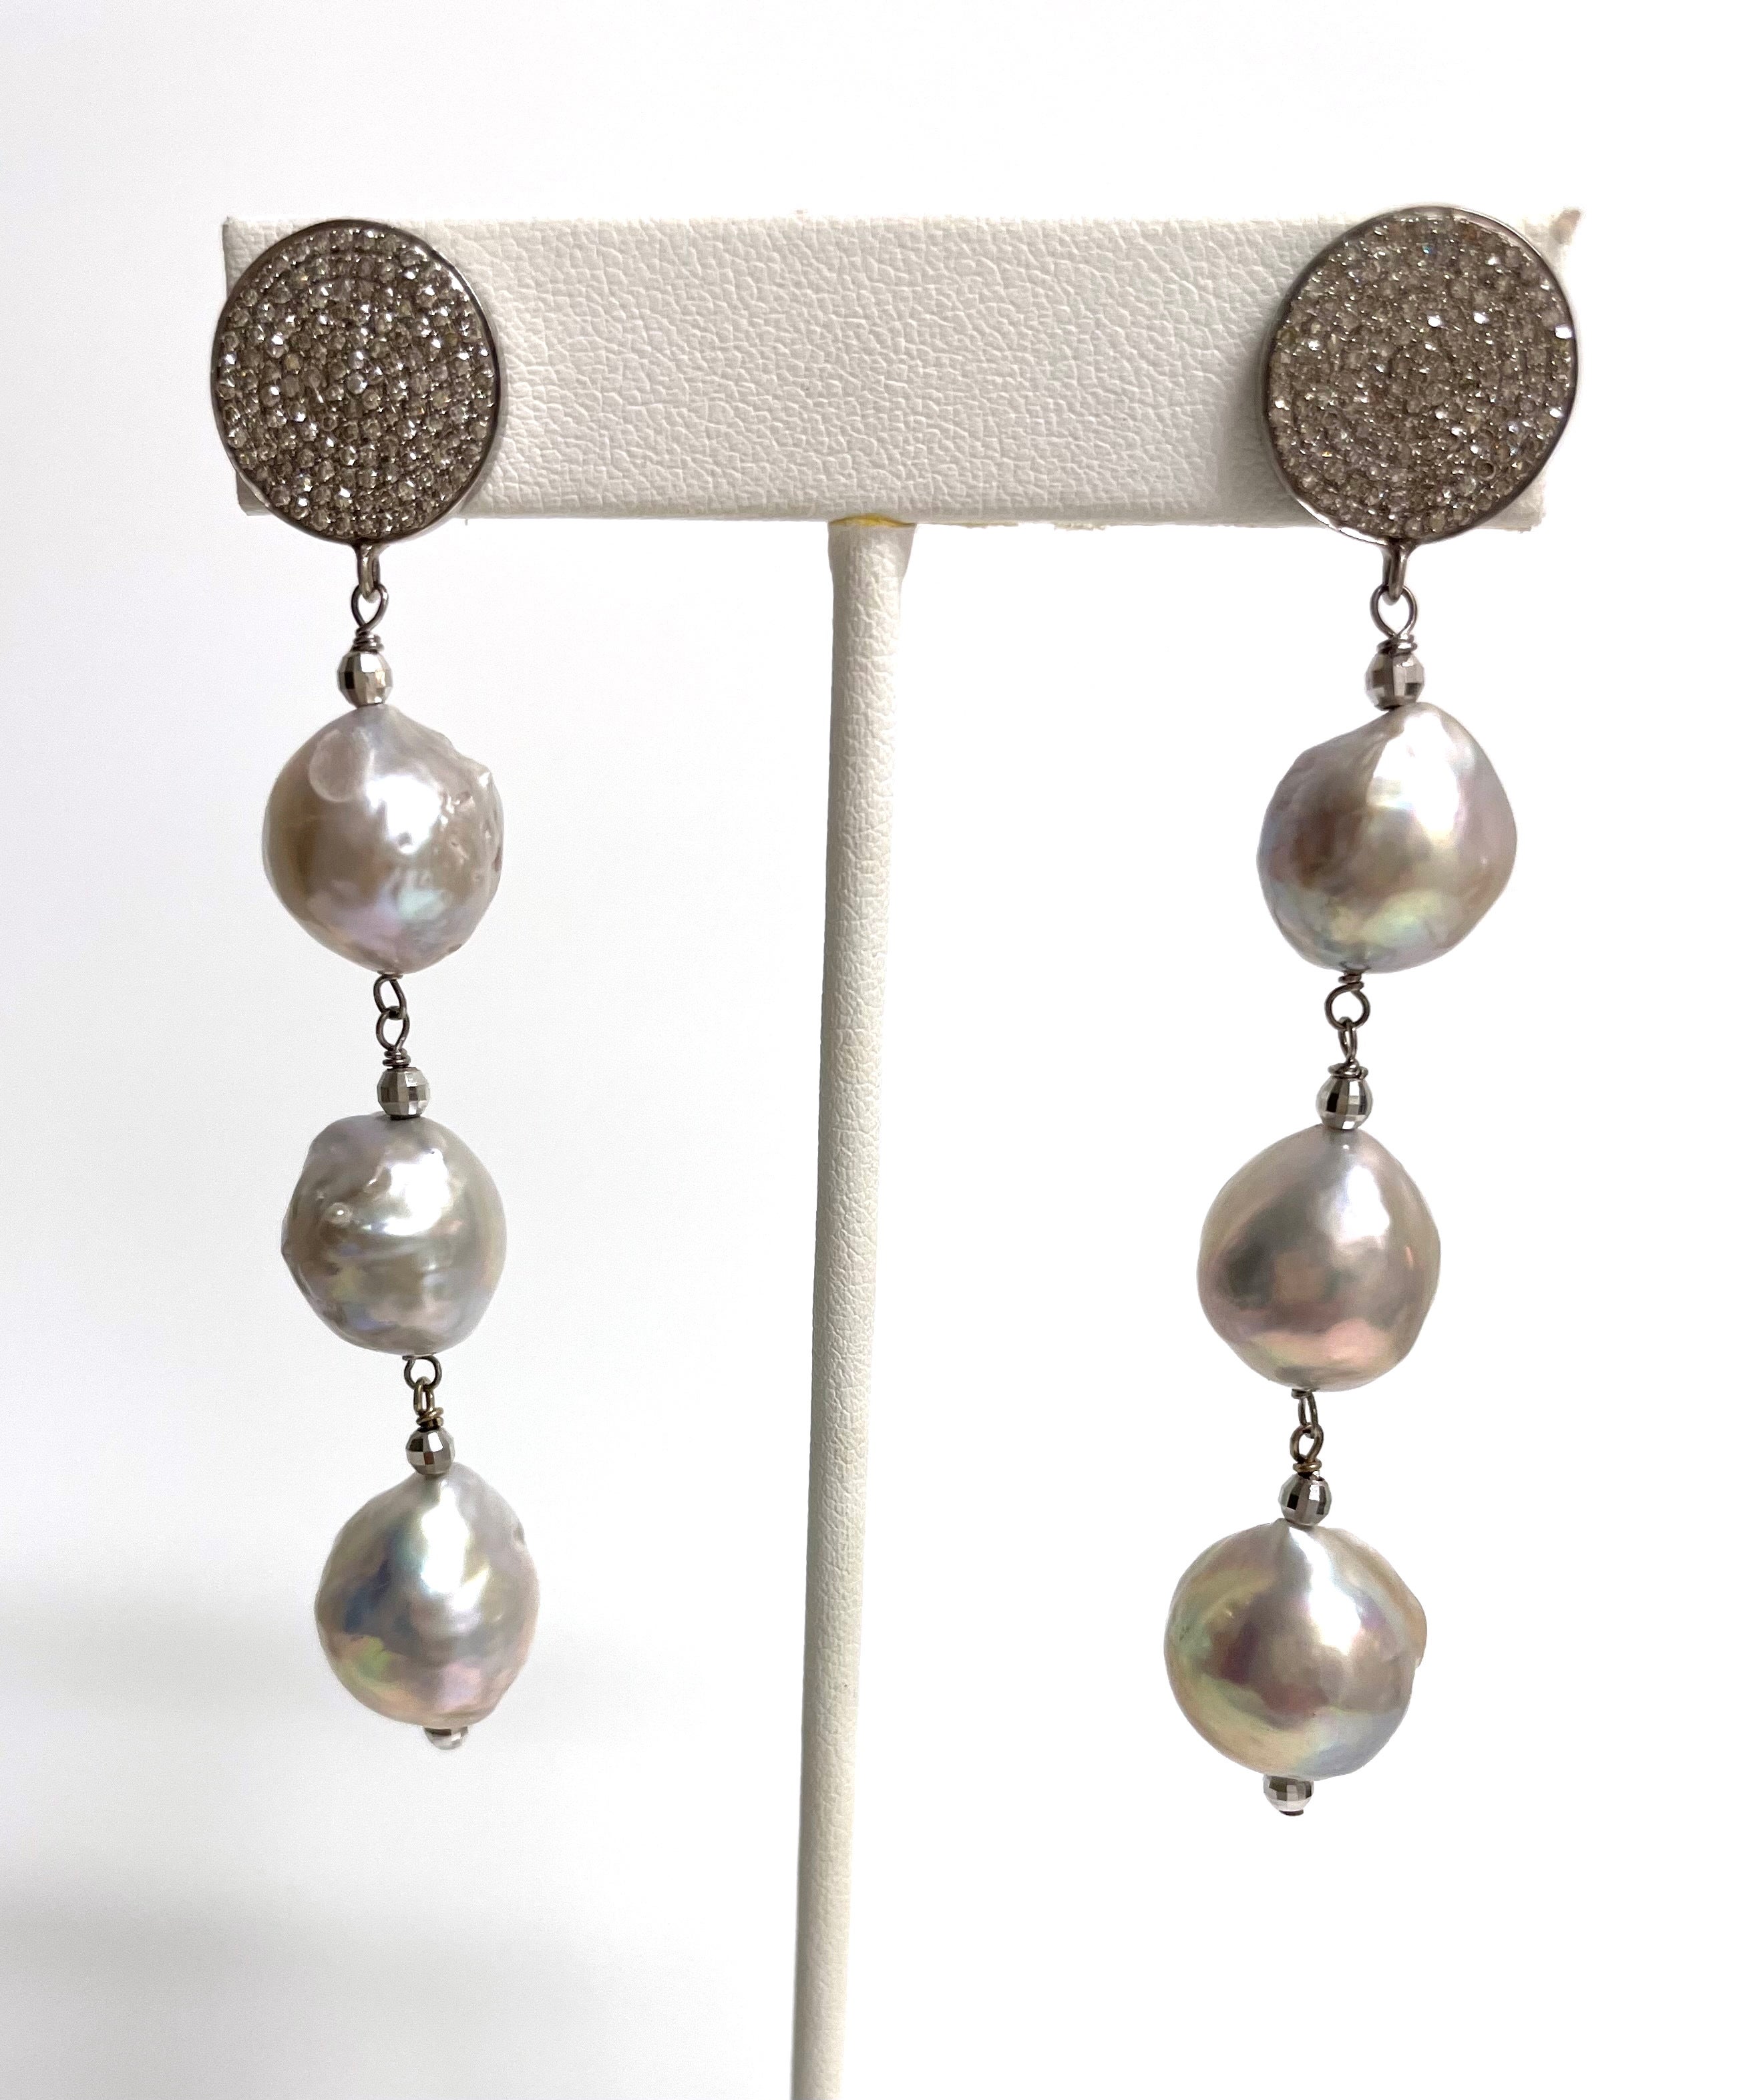 Description
Large silver-gray rare nucleated freshwater pearls accented with 14k white gold faceted balls with pave diamond stud earrings.
Item # E3240
Check out matching necklace, item# N3658, sold separately.

Materials and Weight
Freshwater